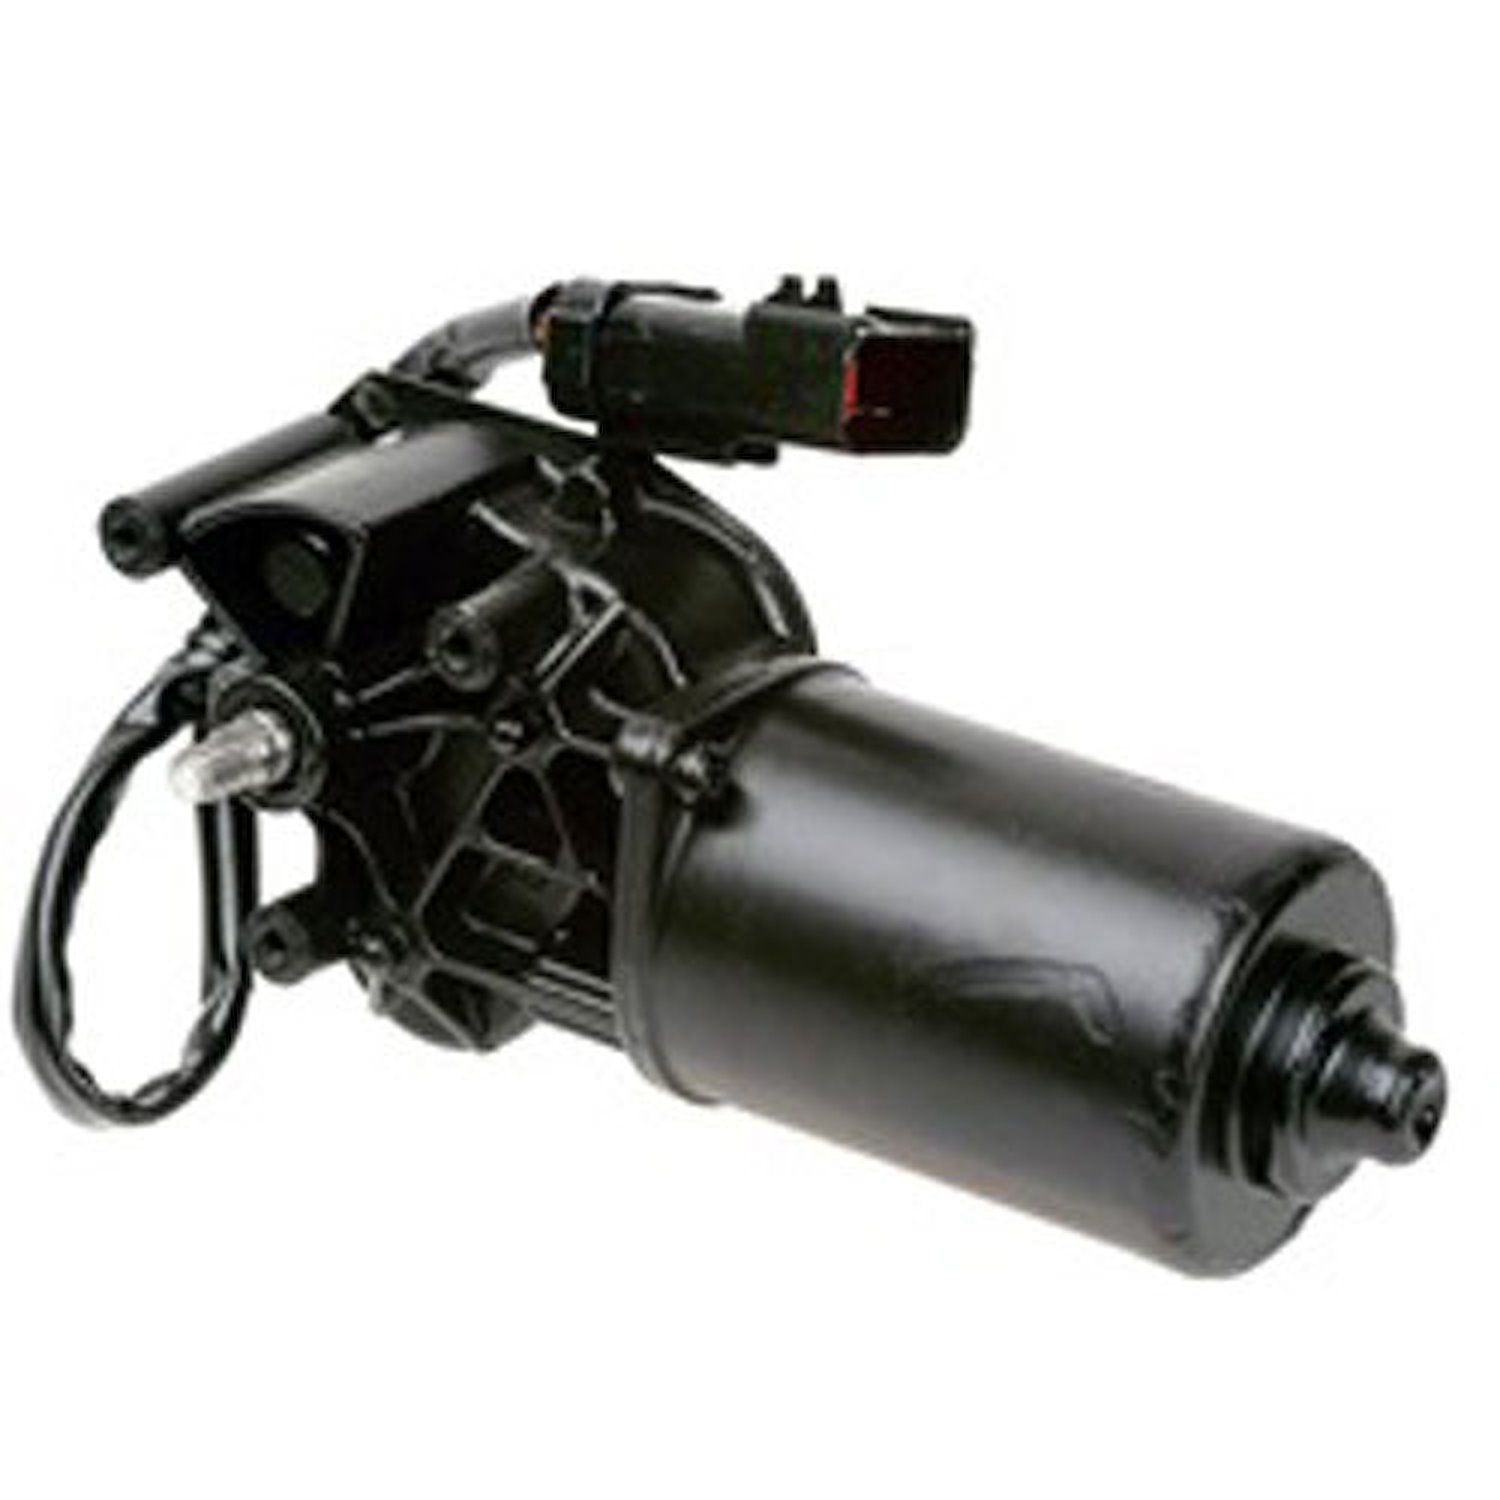 This windshield wiper motor from Omix-ADA fits 97-02 Jeep Wranglers. Fits left or right side.